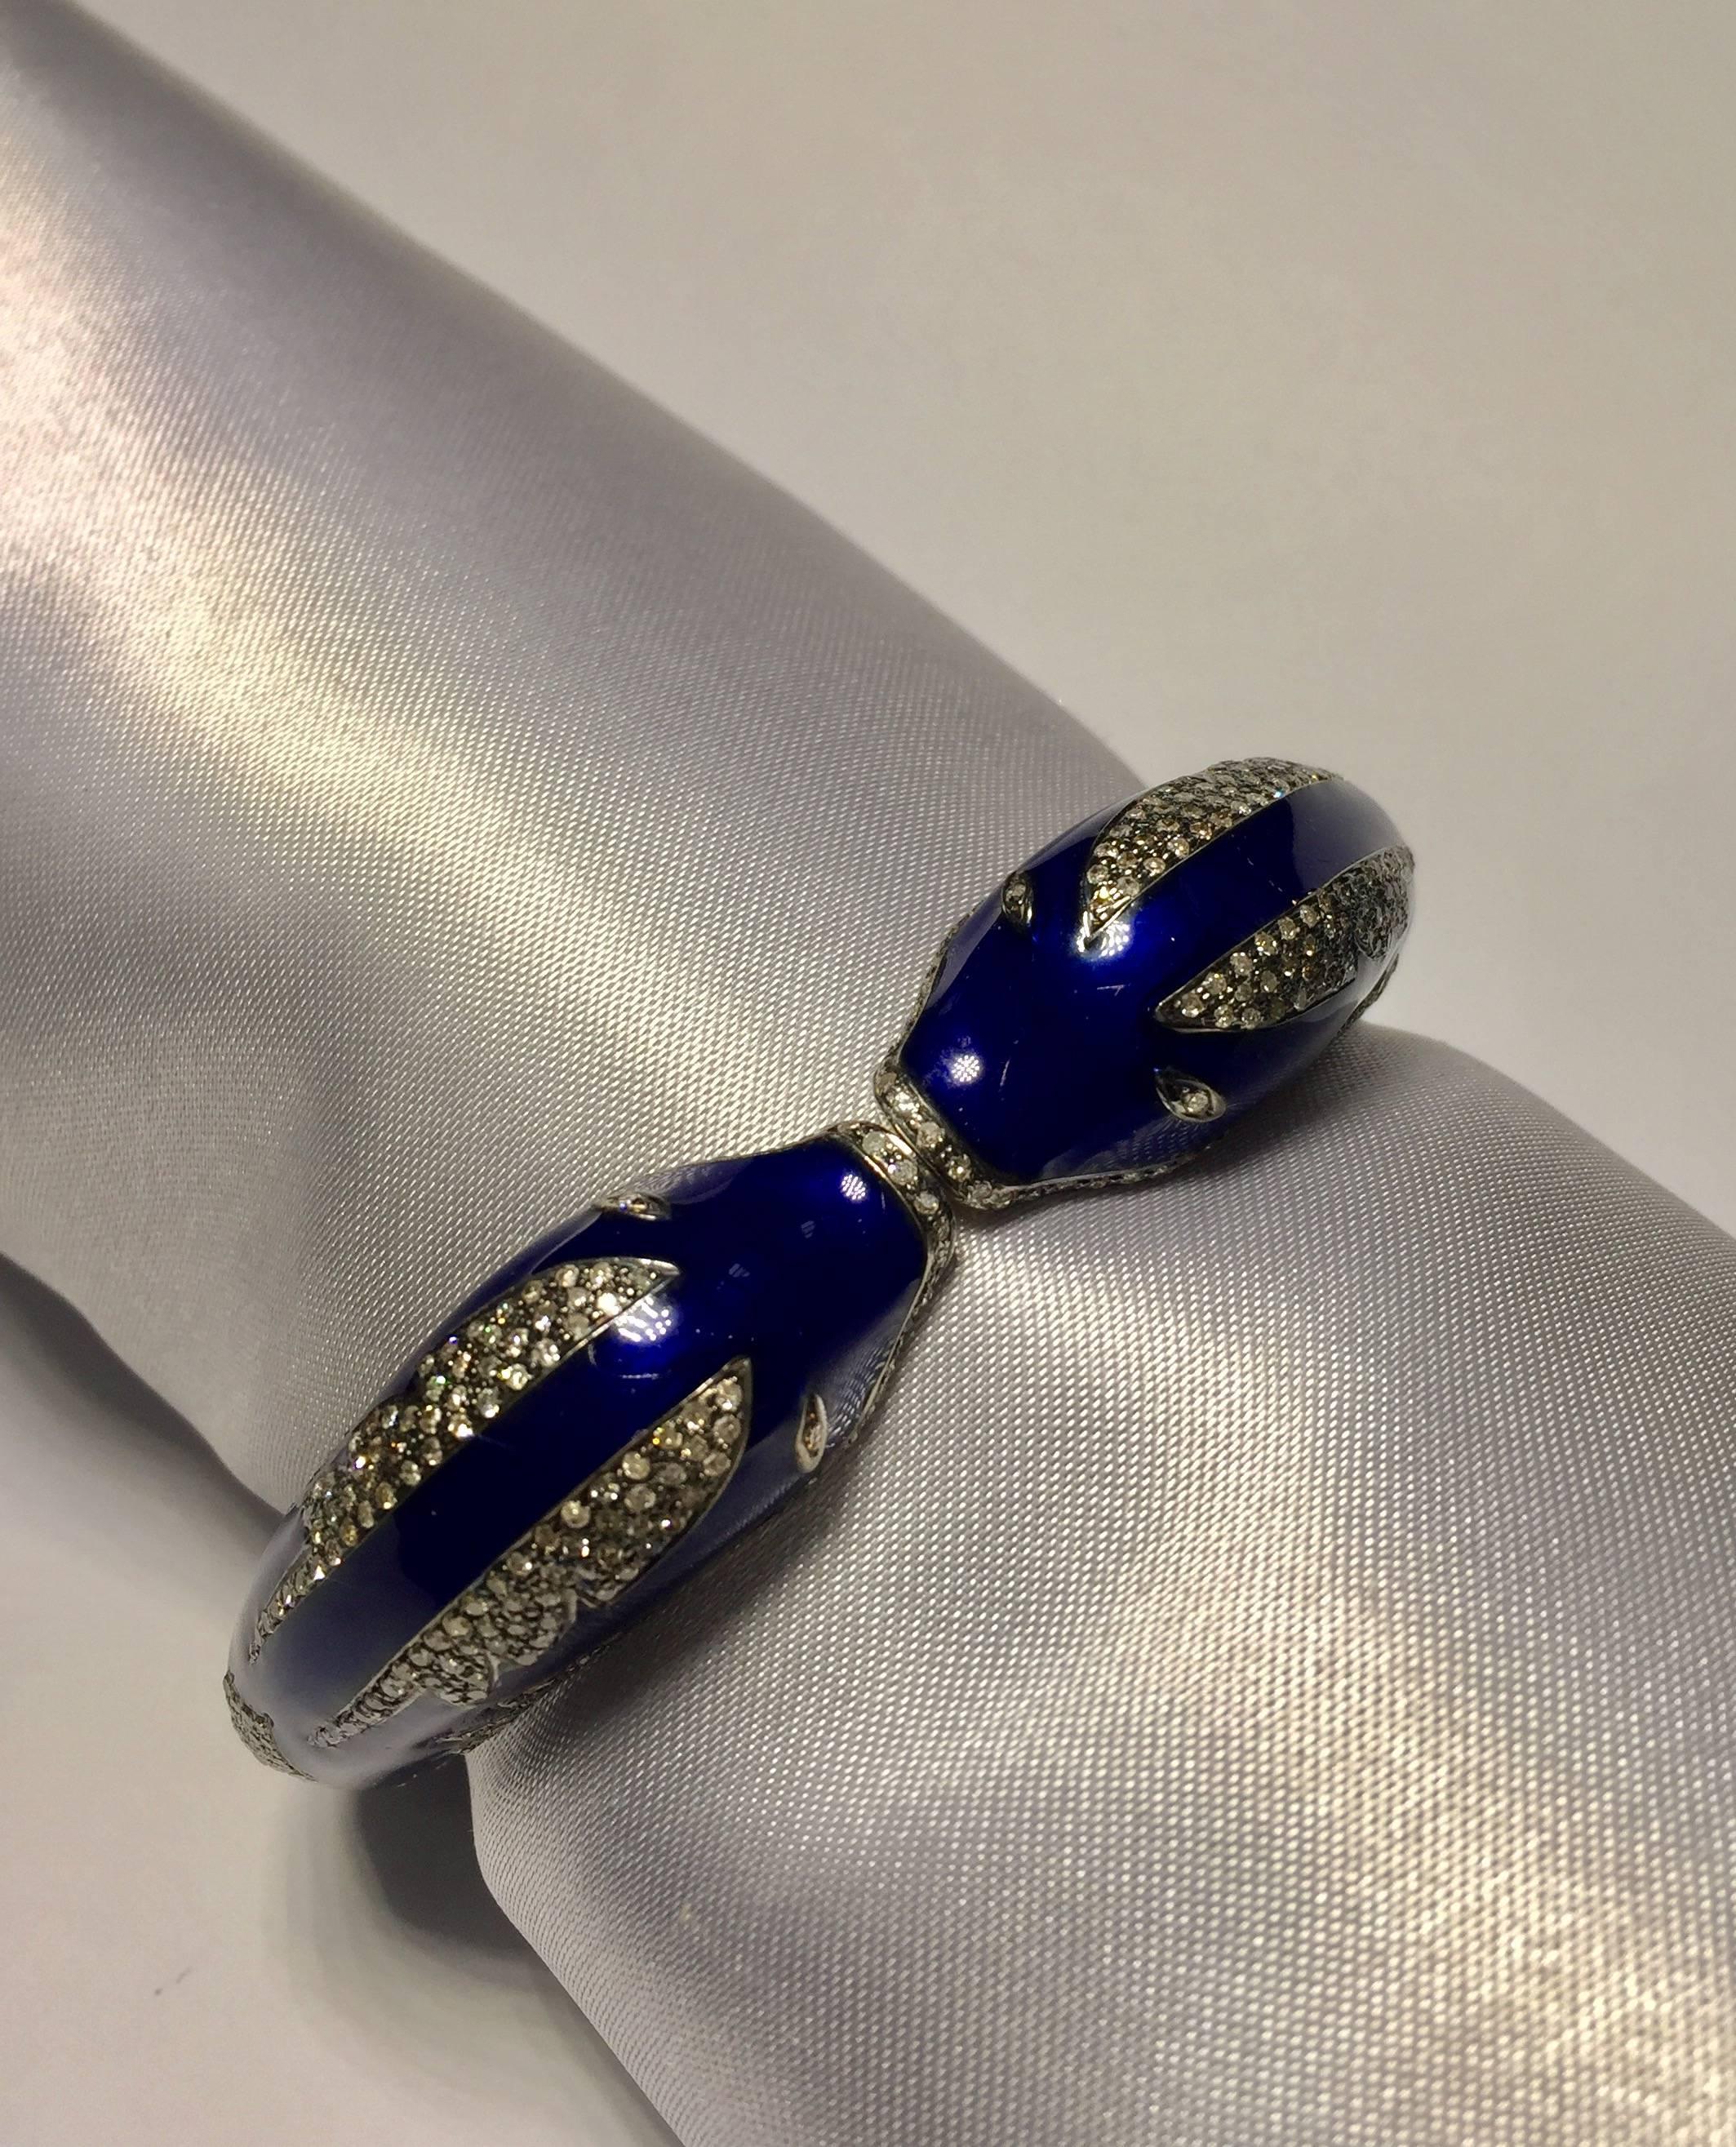 Russian Blue Enamel Diamond Gold Dolphin Bracelet Bangle In Excellent Condition For Sale In Austin, TX